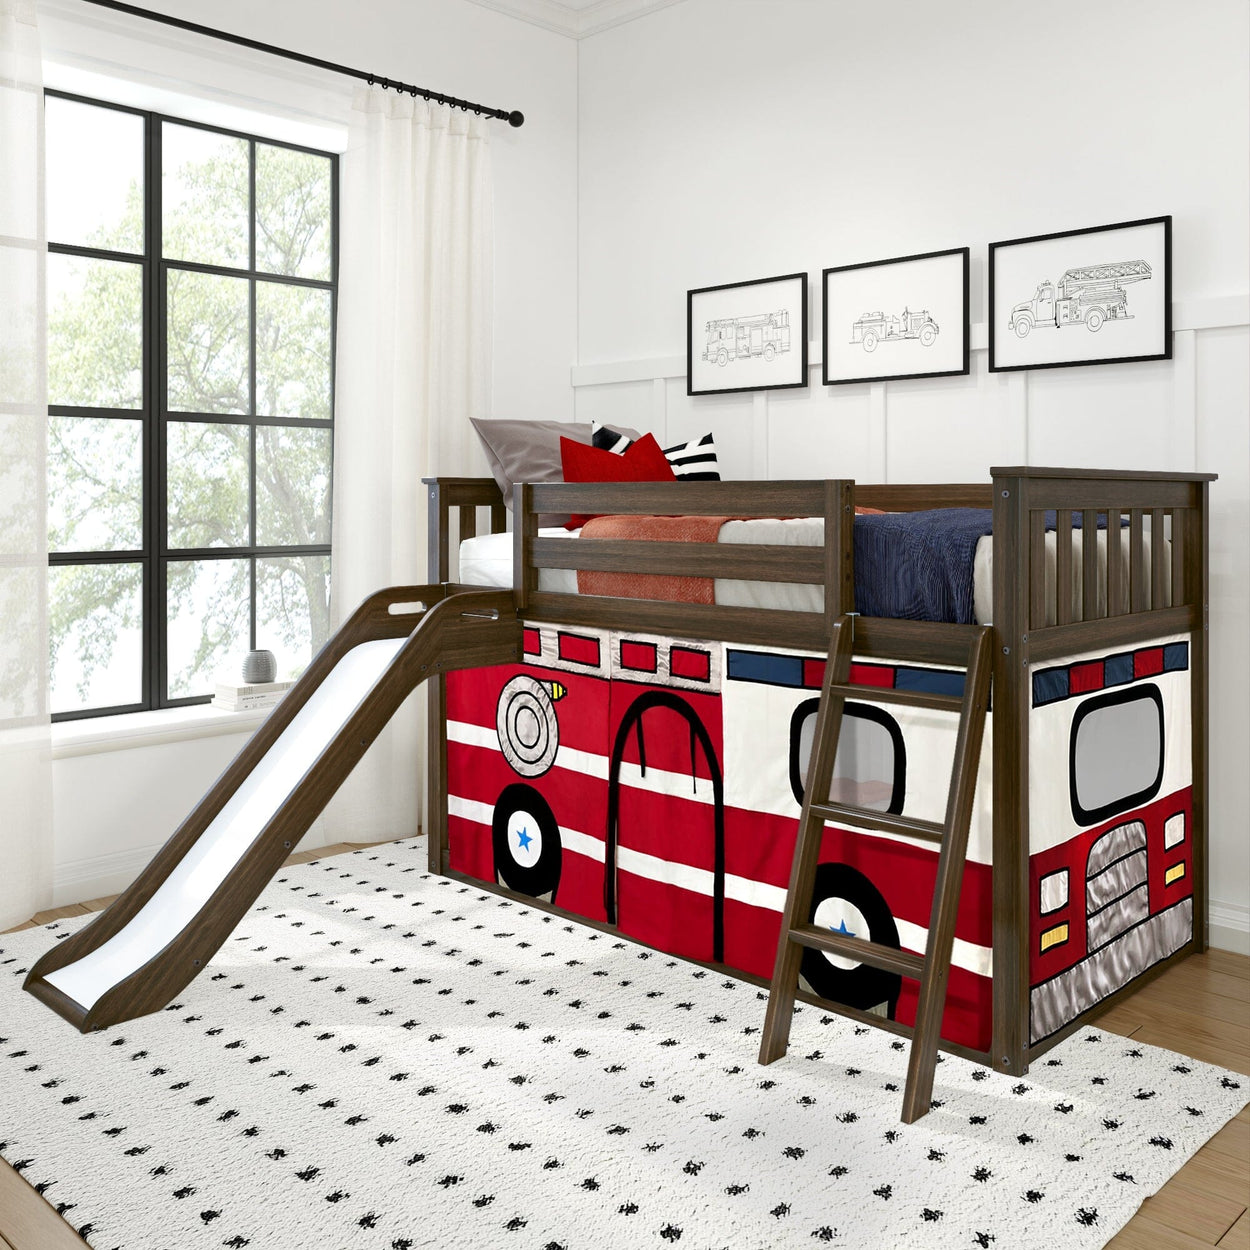 180417151043 : Bunk Beds Low Bunk with Easy Slide and Firetruck Curtain, Clay